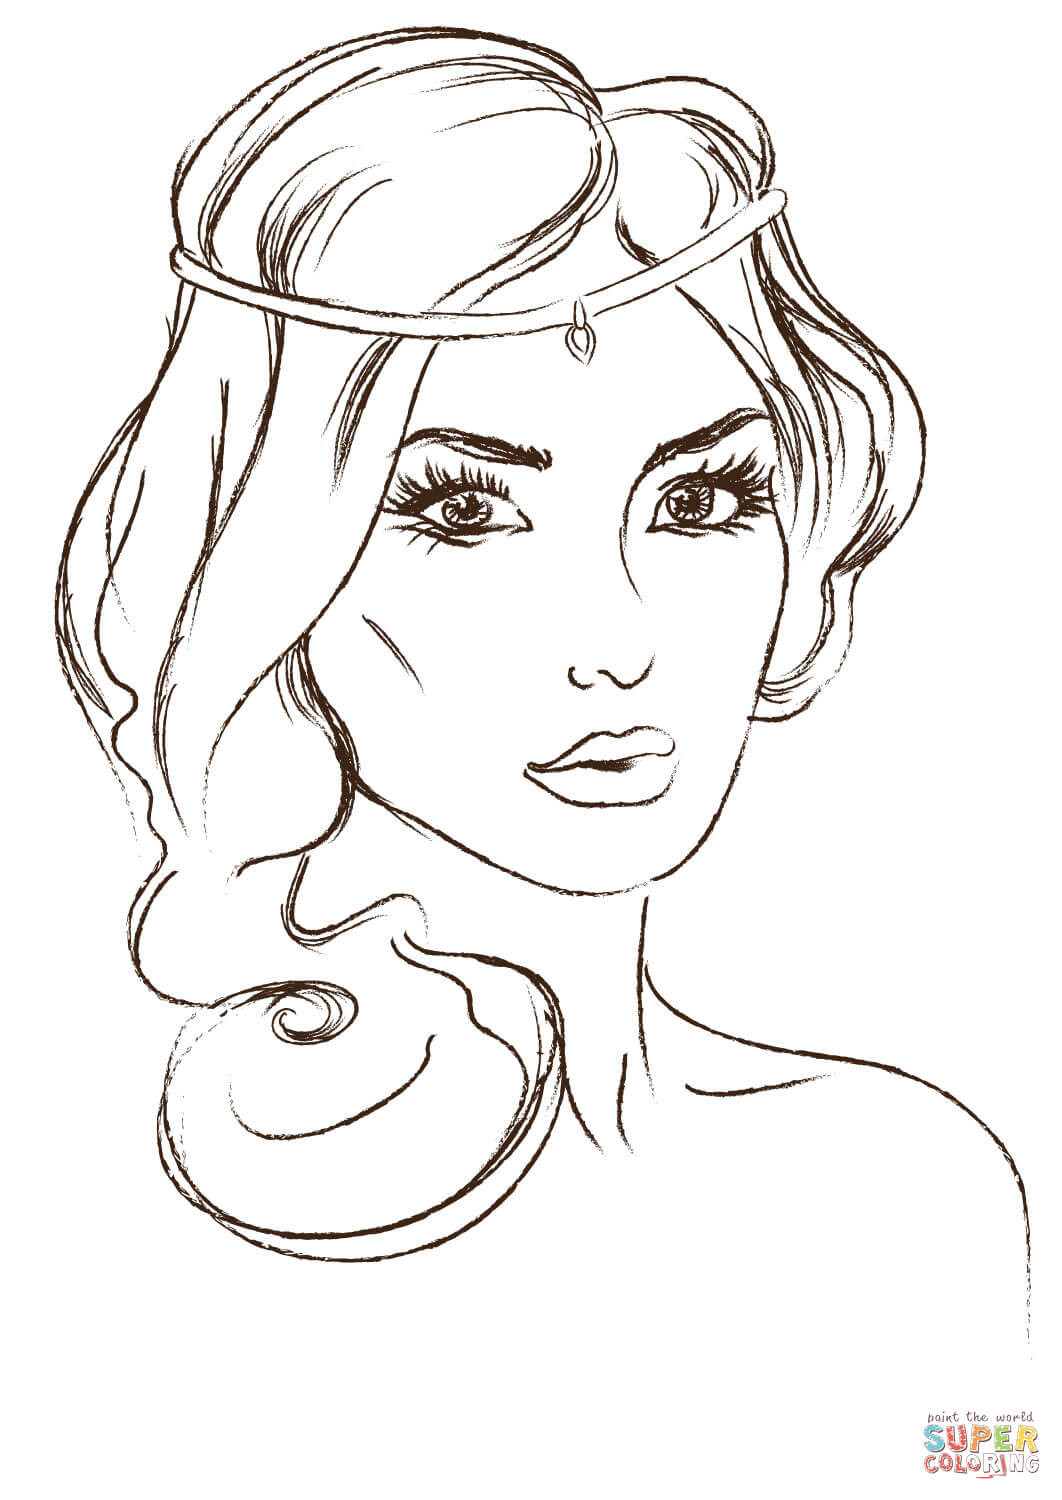 Girl Faces Coloring Pages
 Gorgeous Princess coloring page